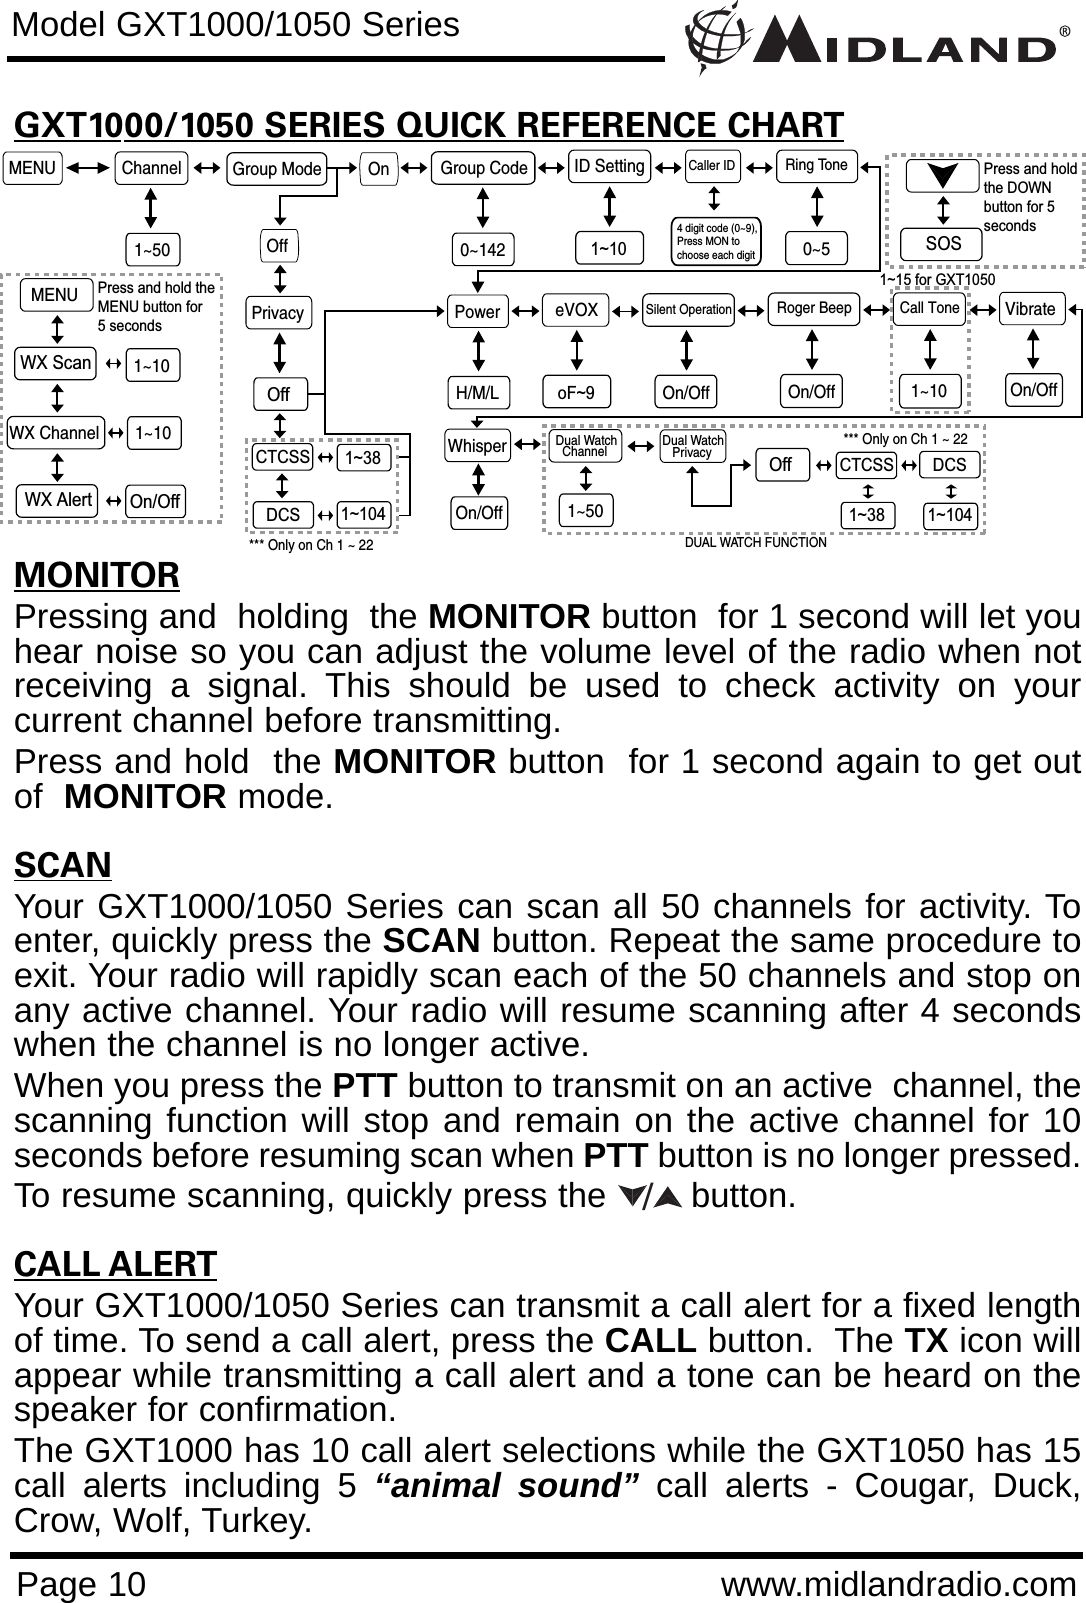 Page 10 www.midlandradio.comGXT1000/1050 SERIES QUICK REFERENCE CHARTMONITORPressing and  holding  the MONITOR button  for 1 second will let youhear noise so you can adjust the volume level of the radio when notreceiving a signal. This should be used to check activity on yourcurrent channel before transmitting. Press and hold  the MONITOR button  for 1 second again to get outof  MONITOR mode.SCANYour GXT1000/1050 Series can scan all 50 channels for activity. Toenter, quickly press the SCAN button. Repeat the same procedure toexit. Your radio will rapidly scan each of the 50 channels and stop onany active channel. Your radio will resume scanning after 4 secondswhen the channel is no longer active.When you press the PTT button to transmit on an active  channel, thescanning function will stop and remain on the active channel for 10seconds before resuming scan when PTT button is no longer pressed. To resume scanning, quickly press the  button.CALL ALERTYour GXT1000/1050 Series can transmit a call alert for a fixed lengthof time. To send a call alert, press the CALL button.  The TX icon willappear while transmitting a call alert and a tone can be heard on thespeaker for confirmation. The GXT1000 has 10 call alert selections while the GXT1050 has 15call alerts including 5 “animal sound” call alerts - Cougar, Duck,Crow, Wolf, Turkey.Model GXT1000/1050 SeriesMENU ChanneleVOX1~50Privacy Roger BeepOn/OffCall Tone1~10VibrateOn/OffWX Channel1~10Silent OperationOn/OffoF~9OffCTCSSDCS1~381~104WX Alert On/OffGroup Mode OnOffID Setting Ring Tone0~5Group Code0~142Caller ID4 digit code (0~9), Press MON to choose each digit1~101~15 for GXT1050PowerH/M/LMENUPress and hold theMENU button for 5 secondsWX Scan1~10*** Only on Ch 1 ~ 22Dual Watch  Channel1~50Off CTCSS DCS1~38 1~104*** Only on Ch 1 ~ 22DUAL WATCH FUNCTIONDual Watch   PrivacyWhisperOn/OffPress and holdthe DOWN button for 5 secondsSOS/